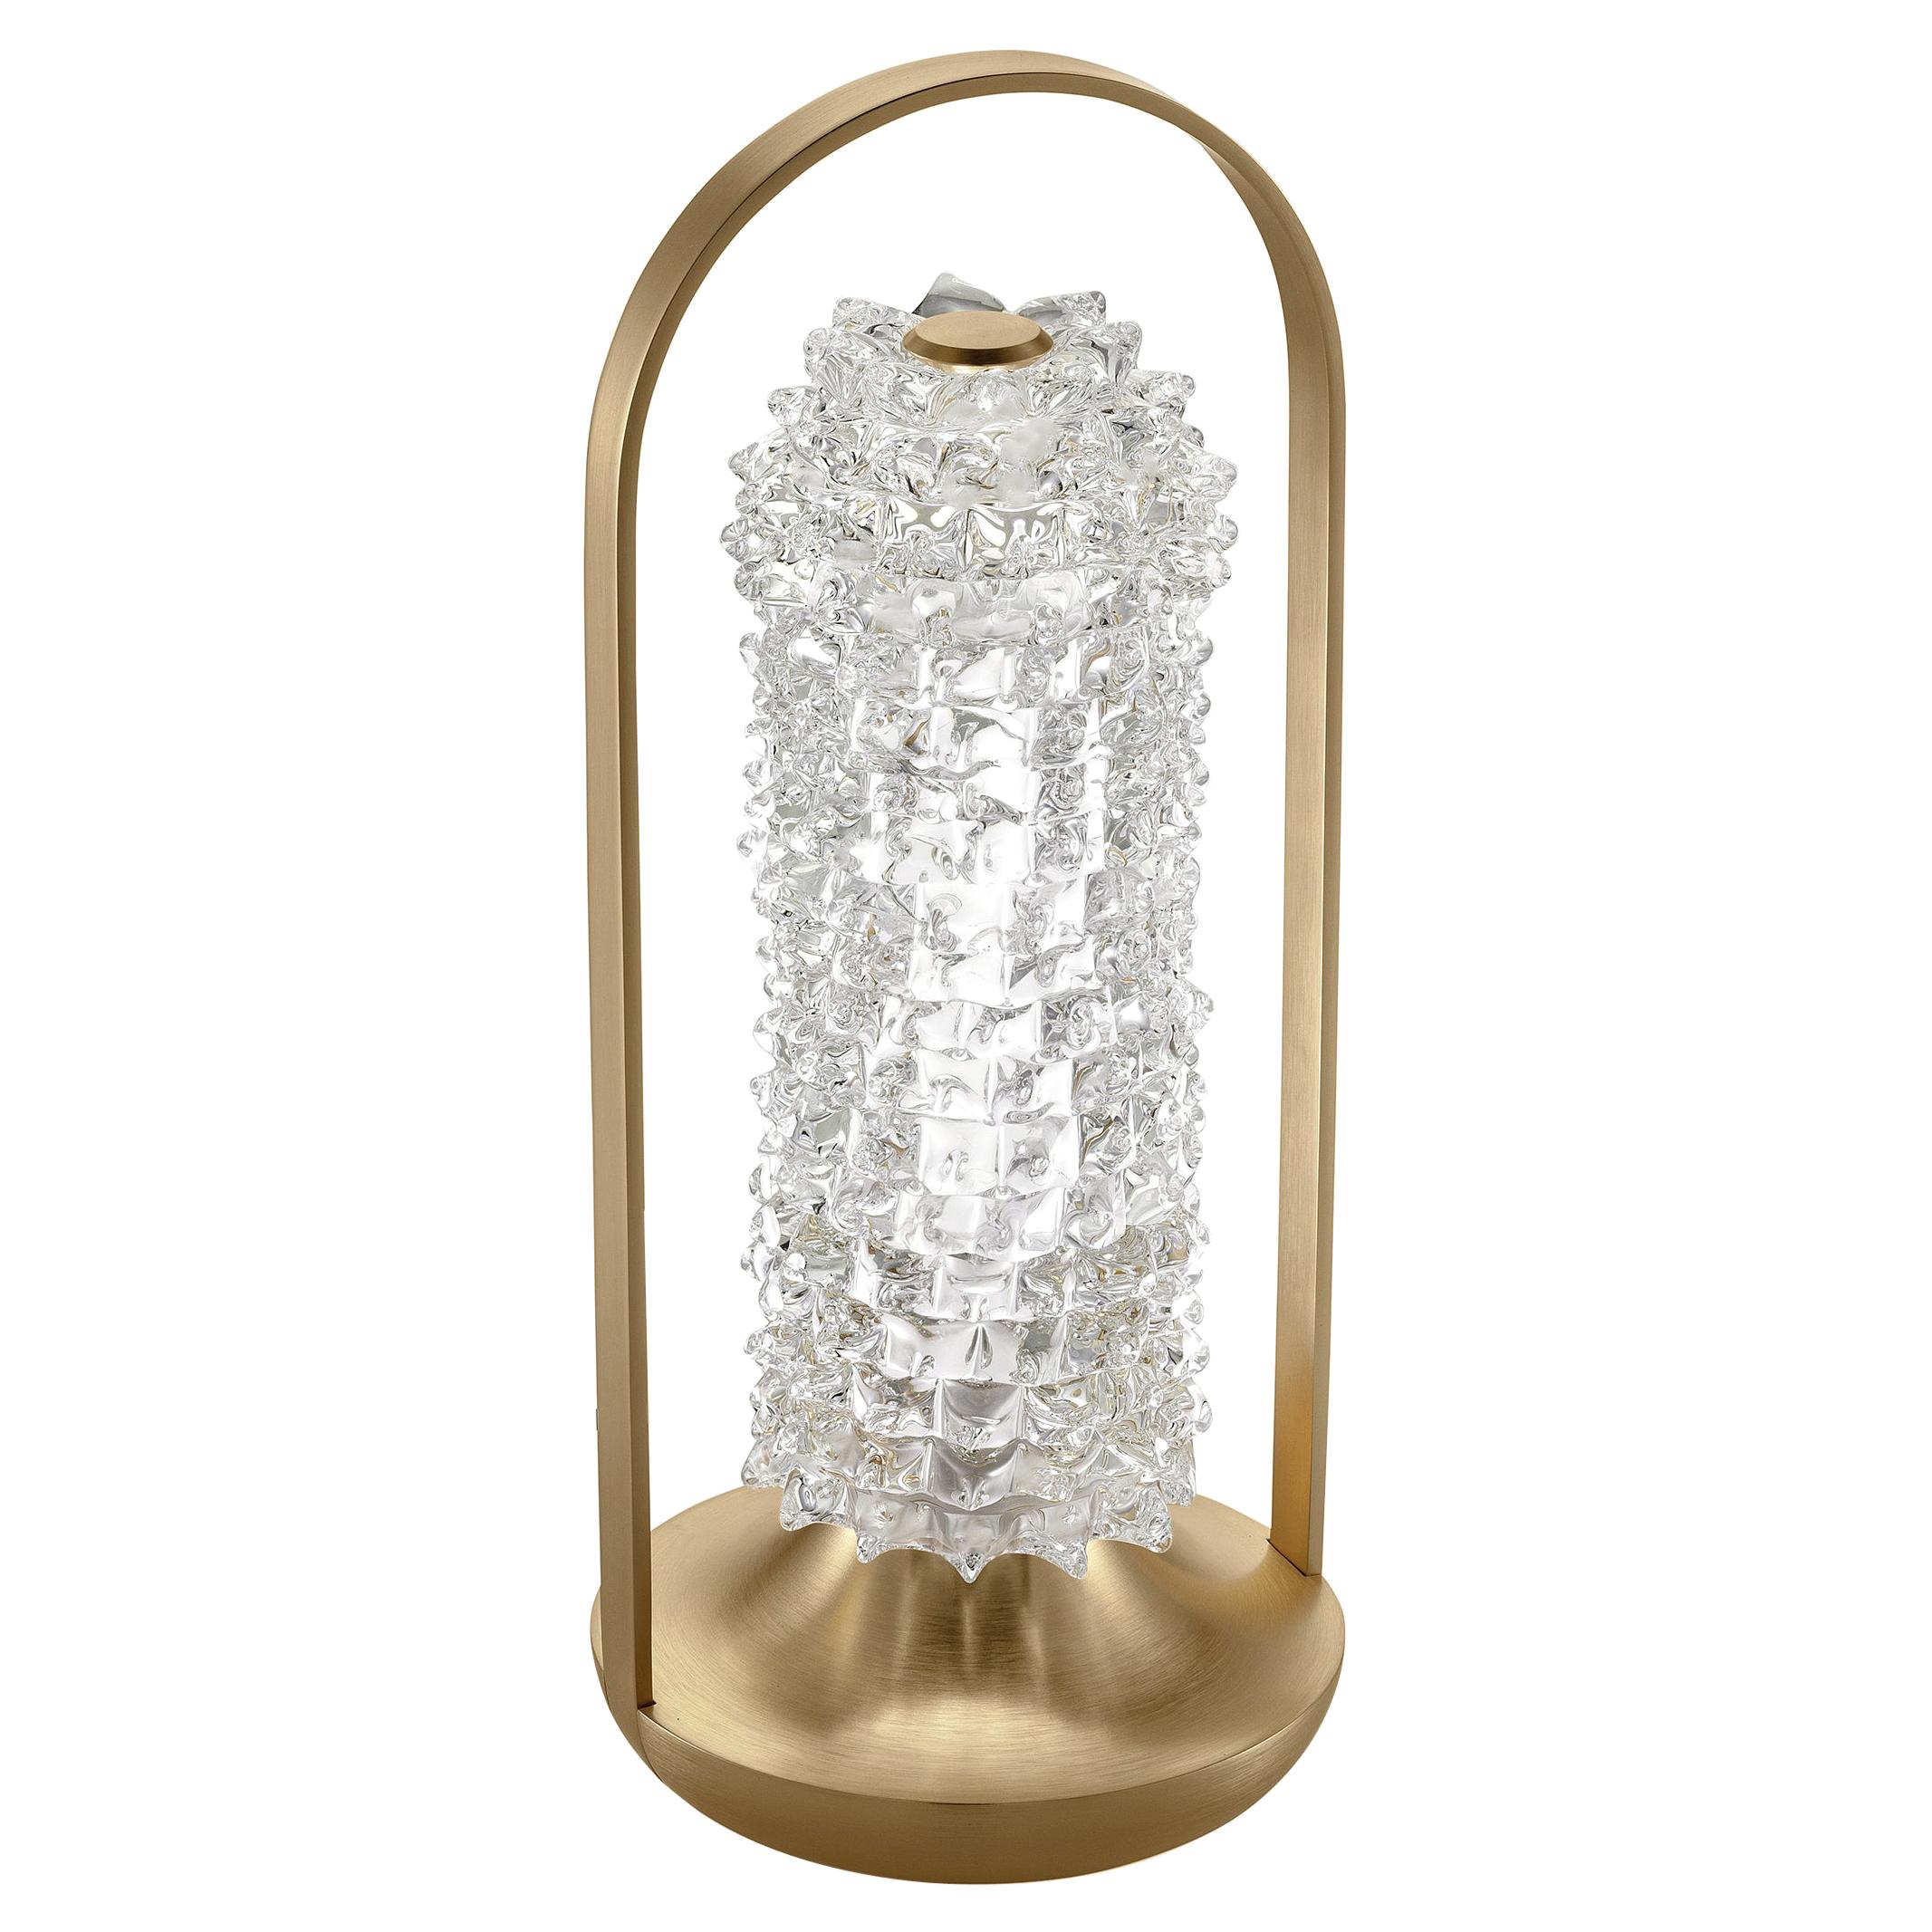 Barovier & Toso Opera 7391 Table Lamp in Crystal with Brushed Gold Finish